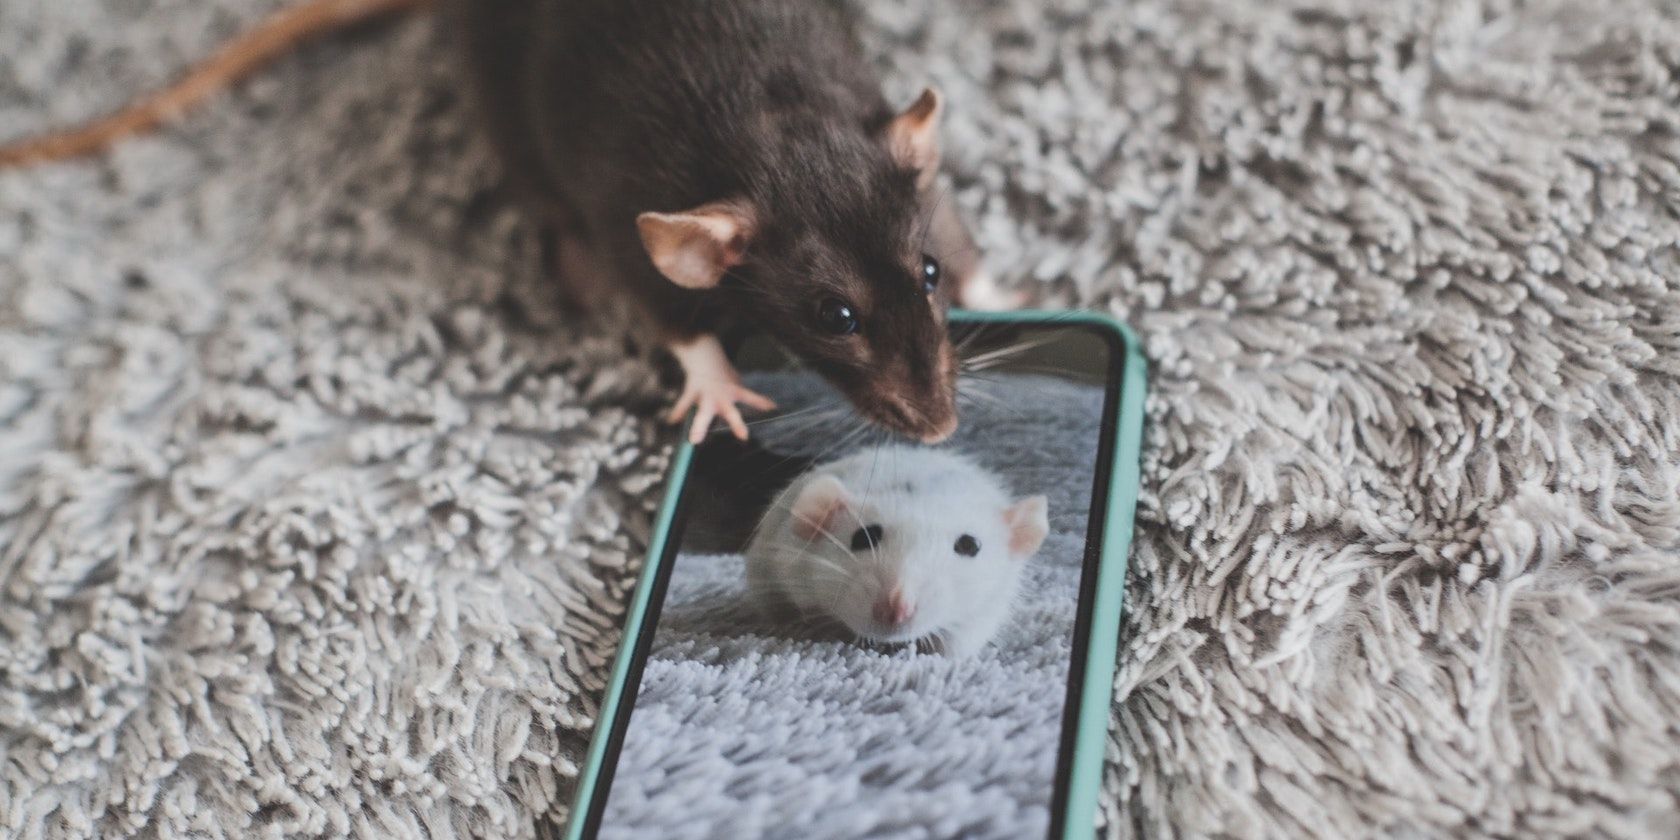 Mouse looking at a smartphone with mouse shown on screen